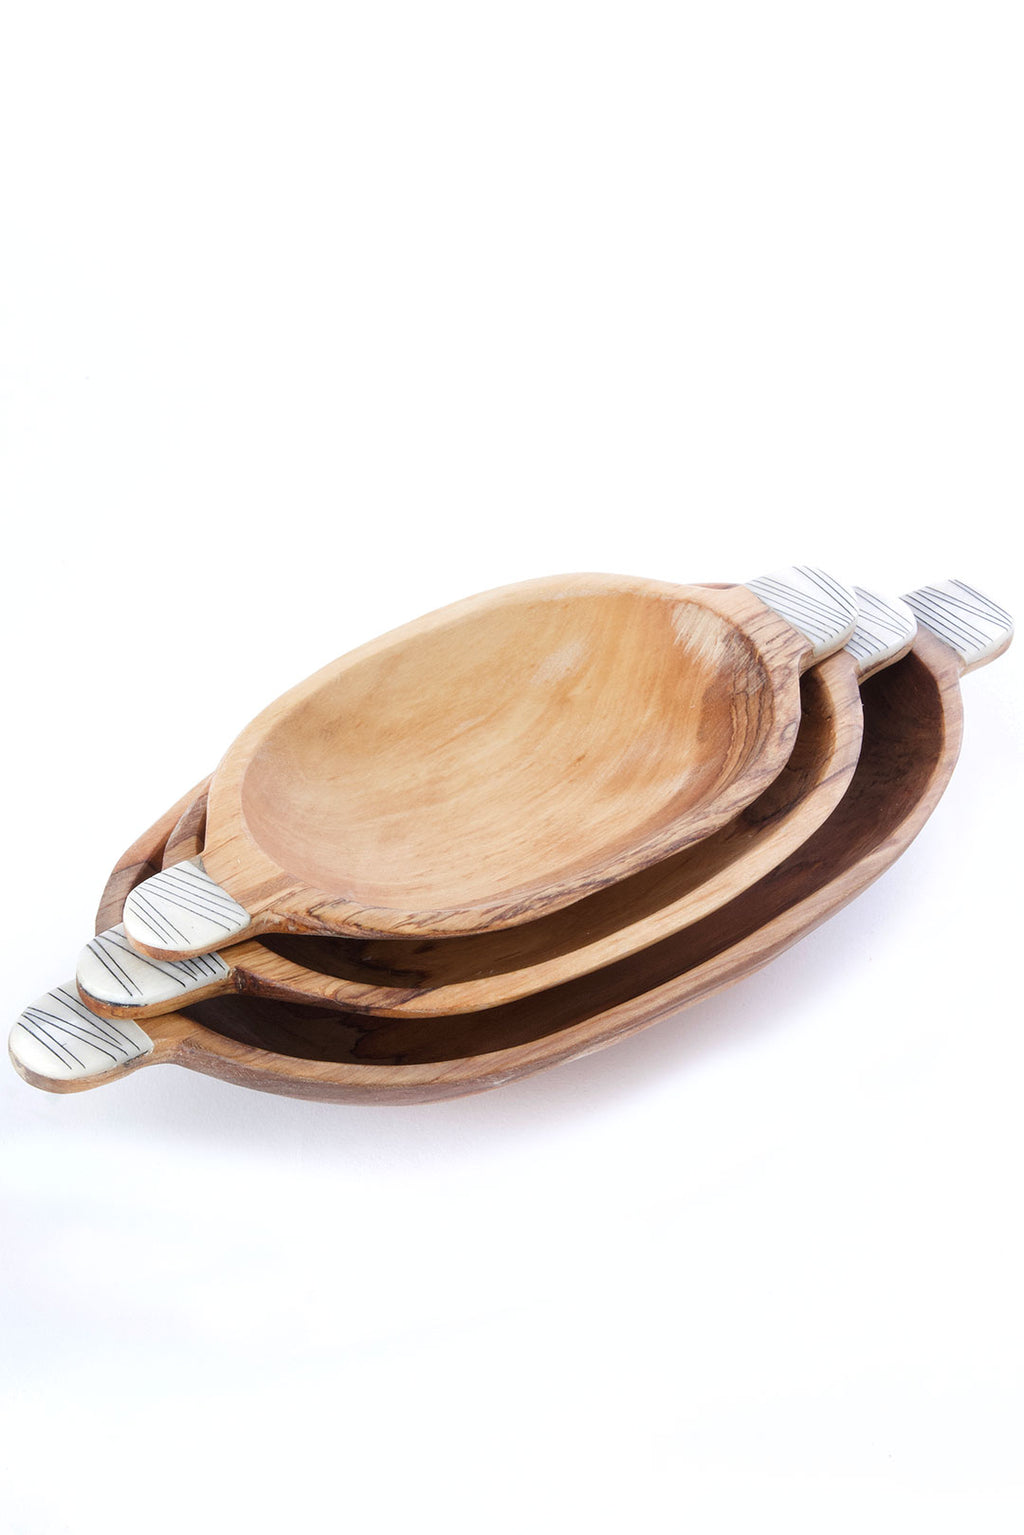 Set of Three Oval Wild Olive Wood Bowls with Striped Bone Handles